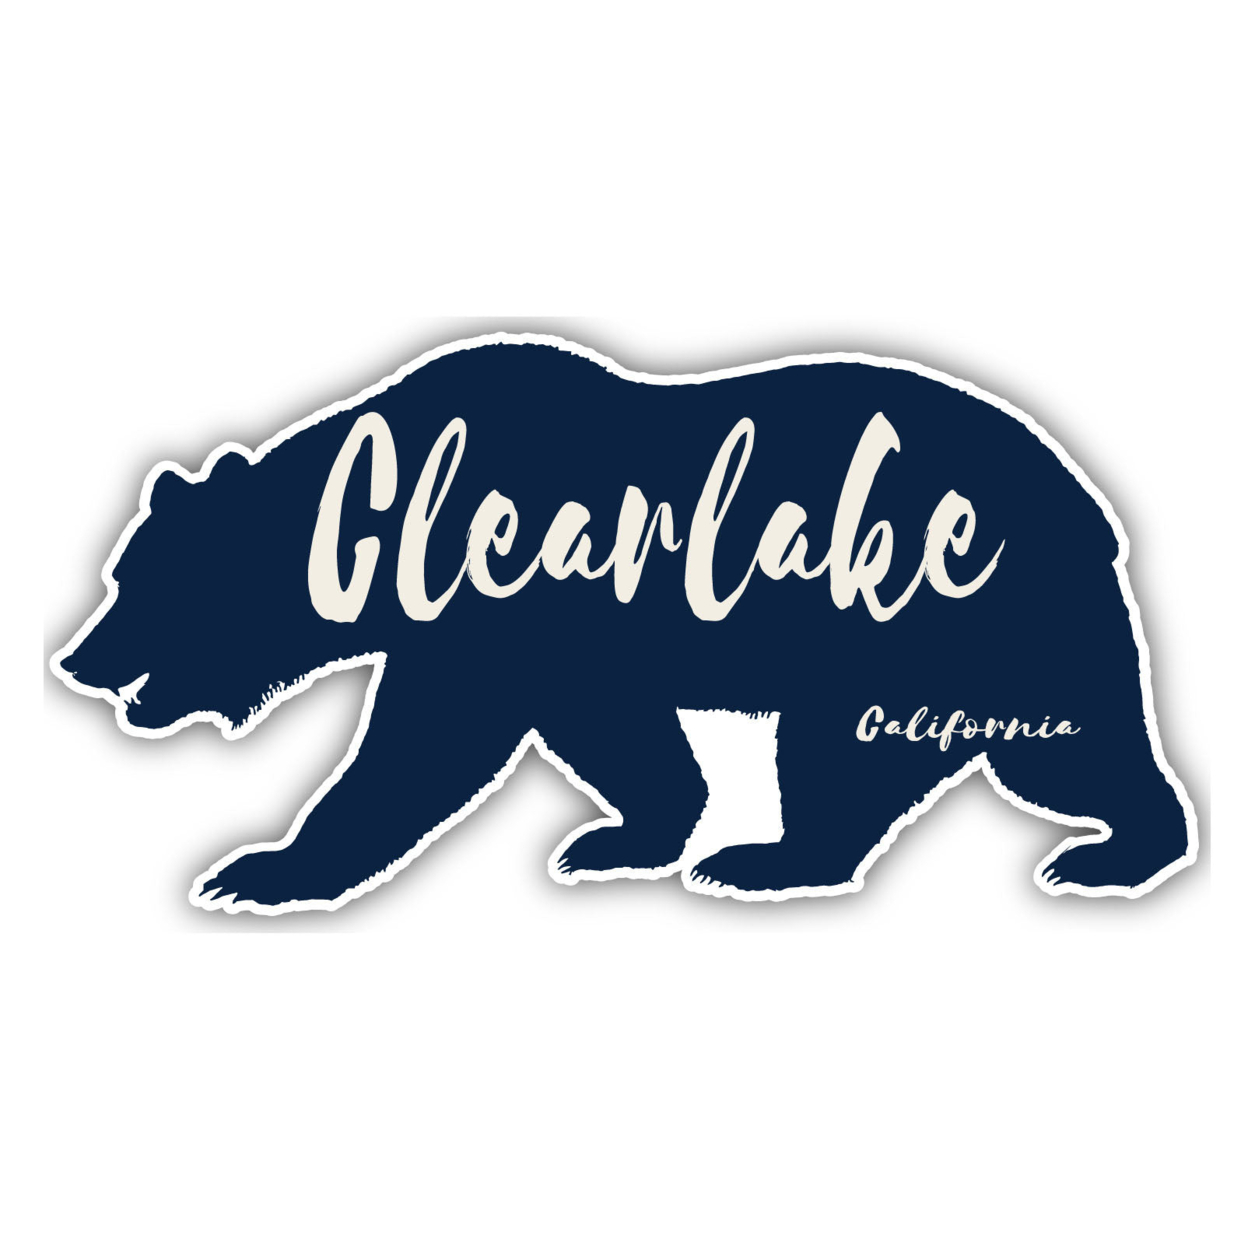 Clearlake California Souvenir Decorative Stickers (Choose Theme And Size) - 4-Pack, 4-Inch, Camp Life